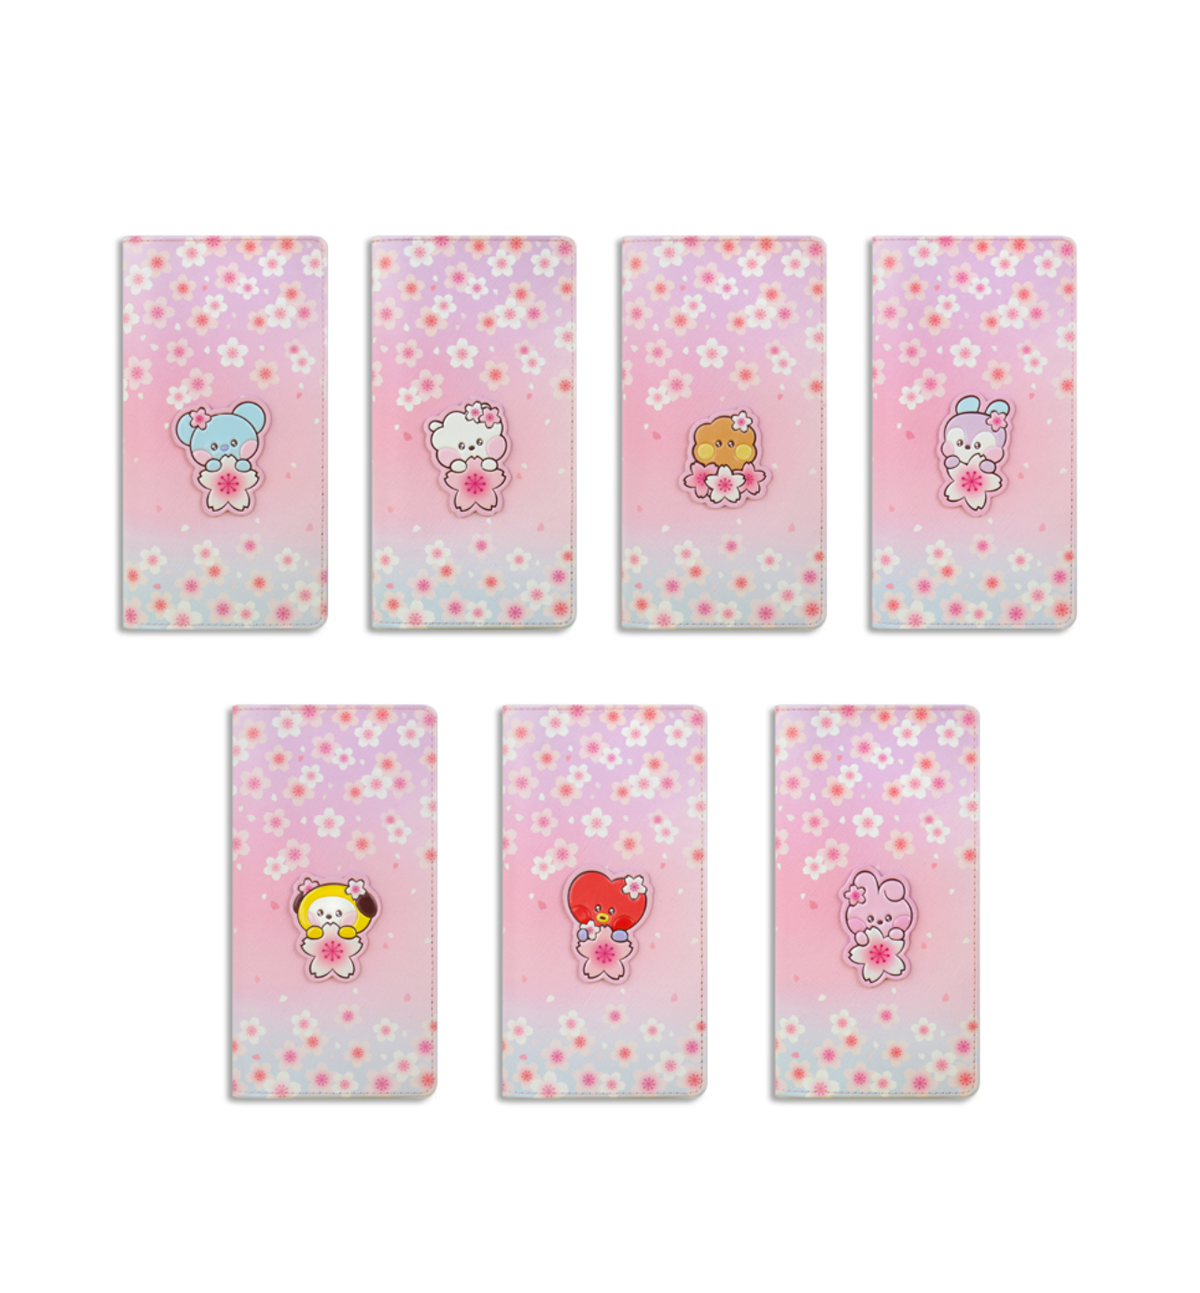 BT21 Cherry Blossom Large Passport Cover [Cooky]